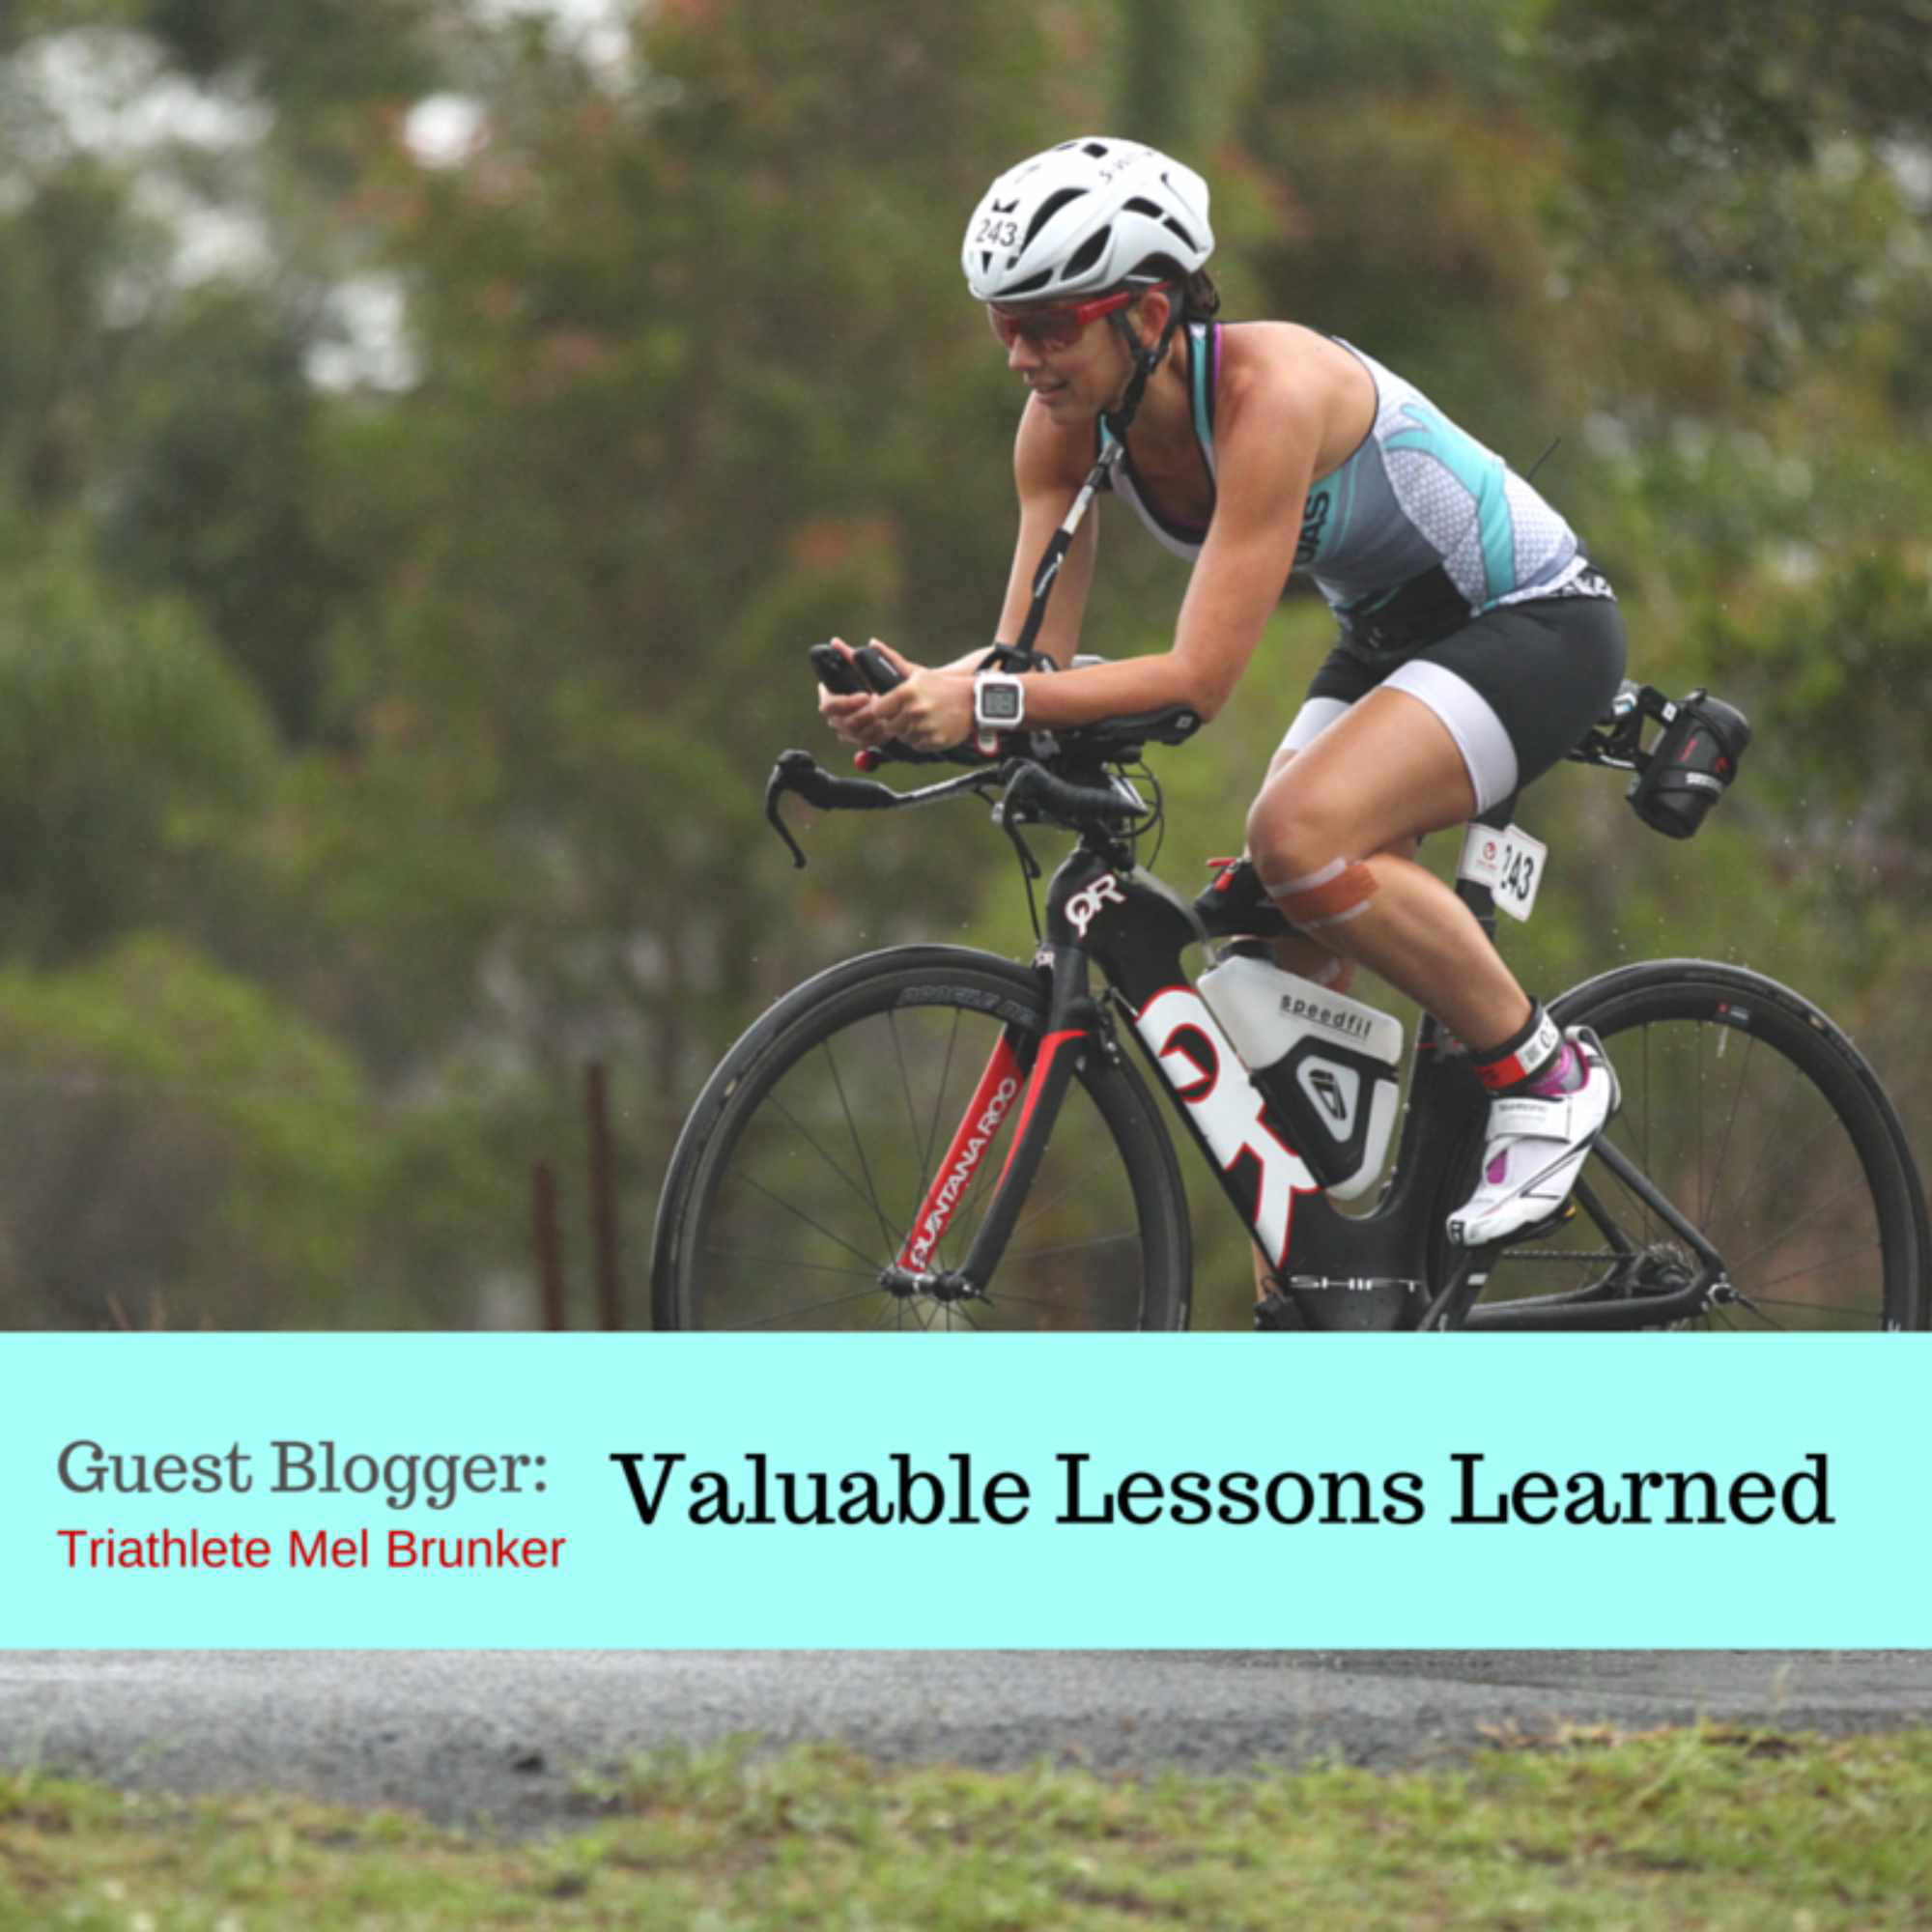 Guest Blogger Triathlete Mel Talks About Valuable Lessons Learned